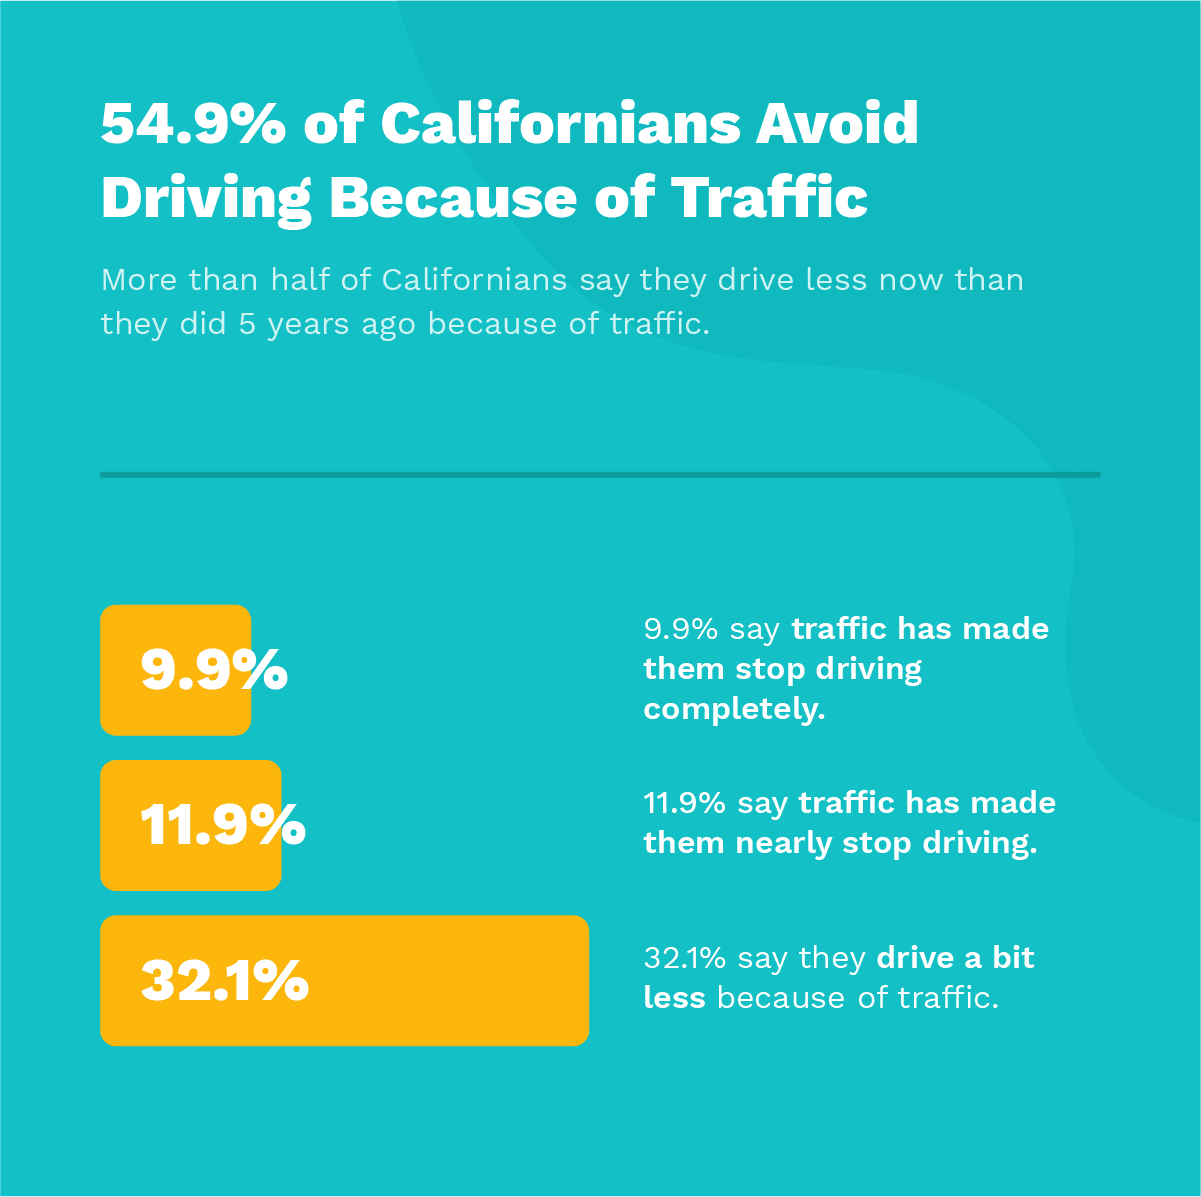 54.9% of Californians Avoid Driving Because of Traffic